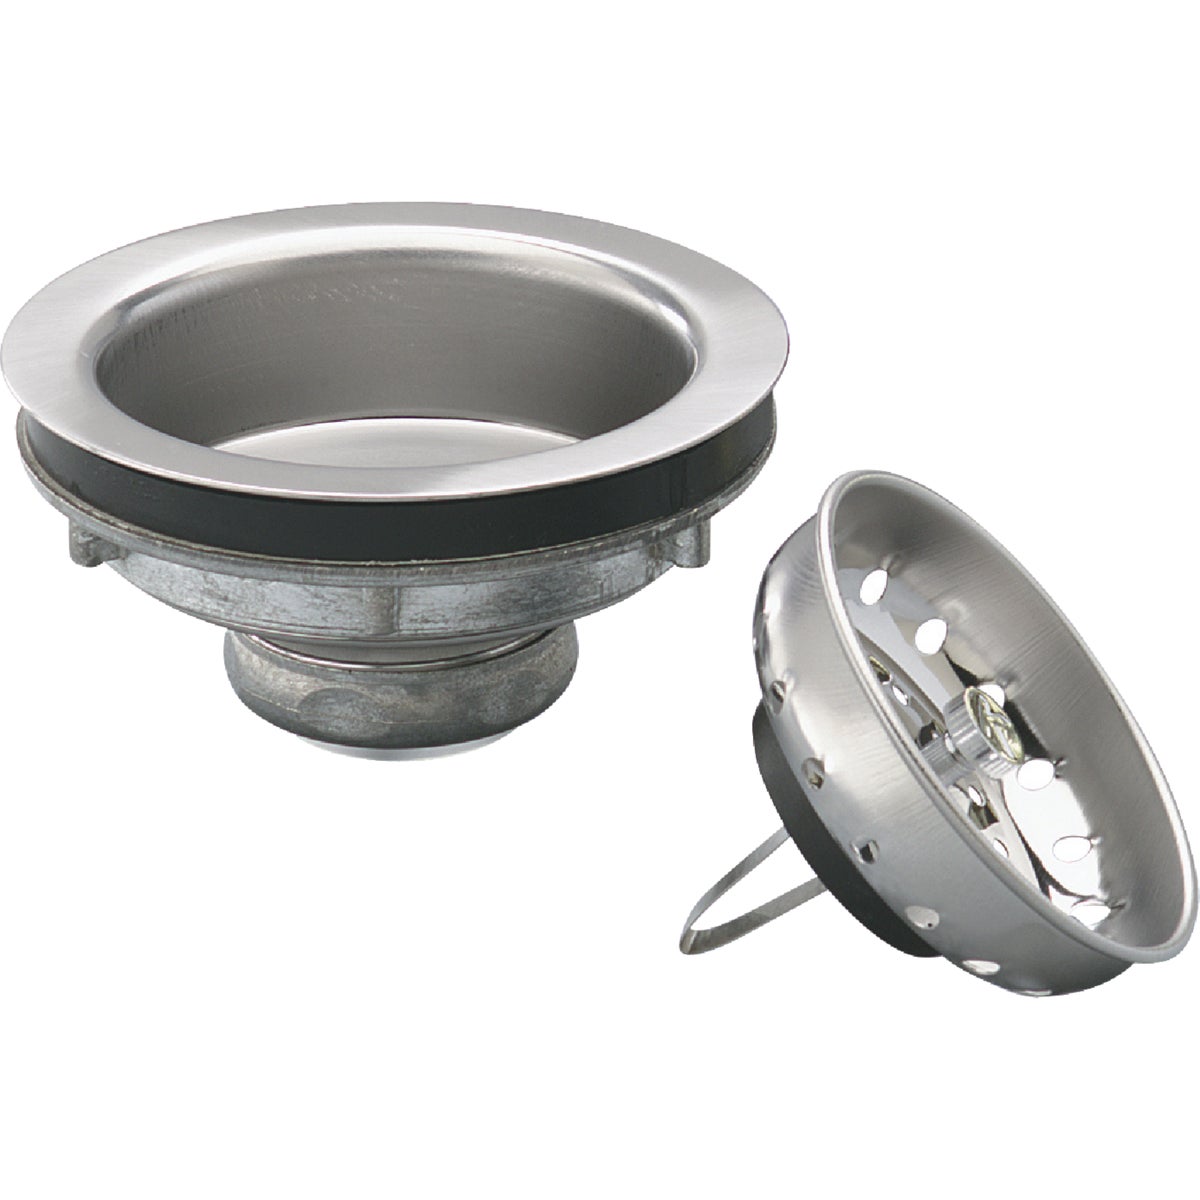 Keeney Champion 3-1/2 In. Stainless Steel Basket Strainer Assembly